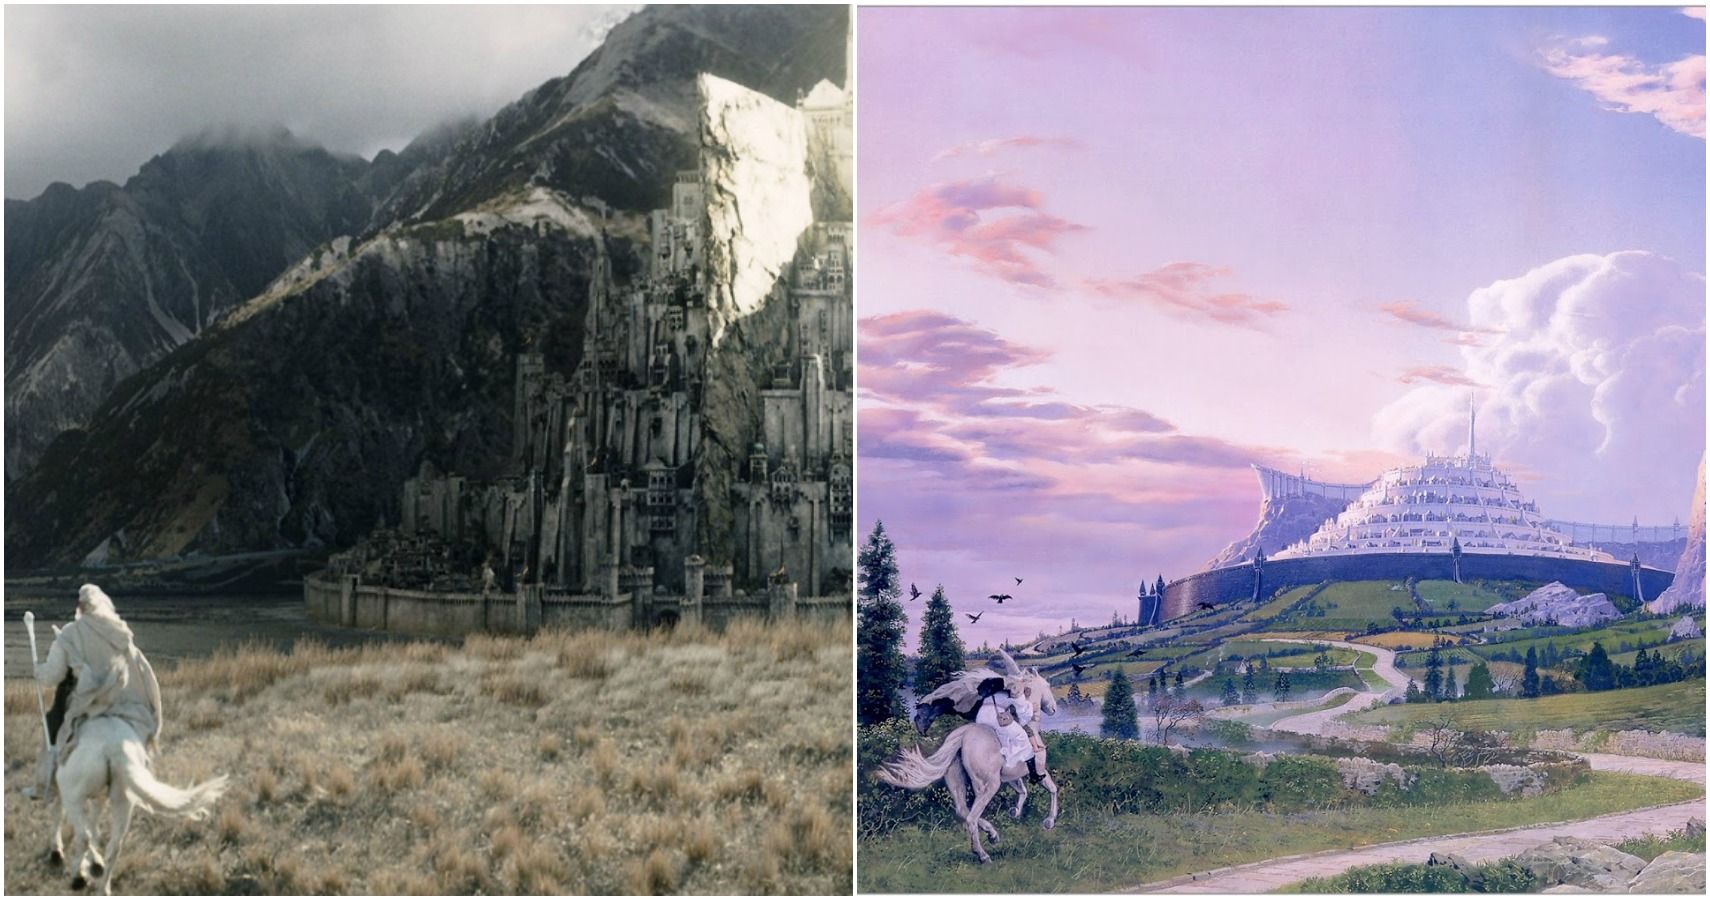 Is Minas Tirith, as depicted in the films, the right size? It